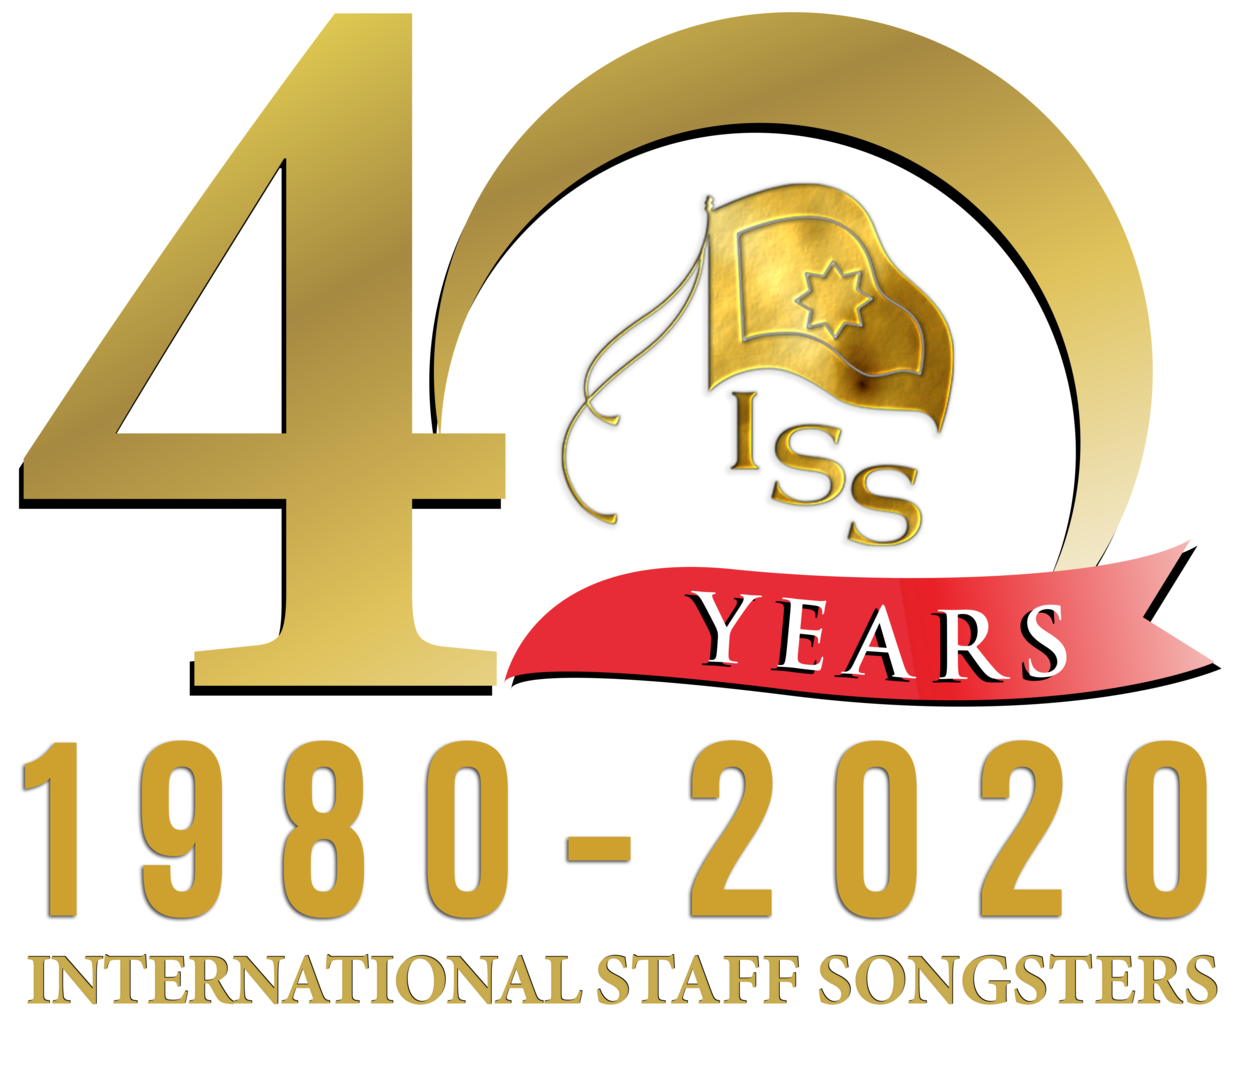 ISS 40 logo 1980 to 2020